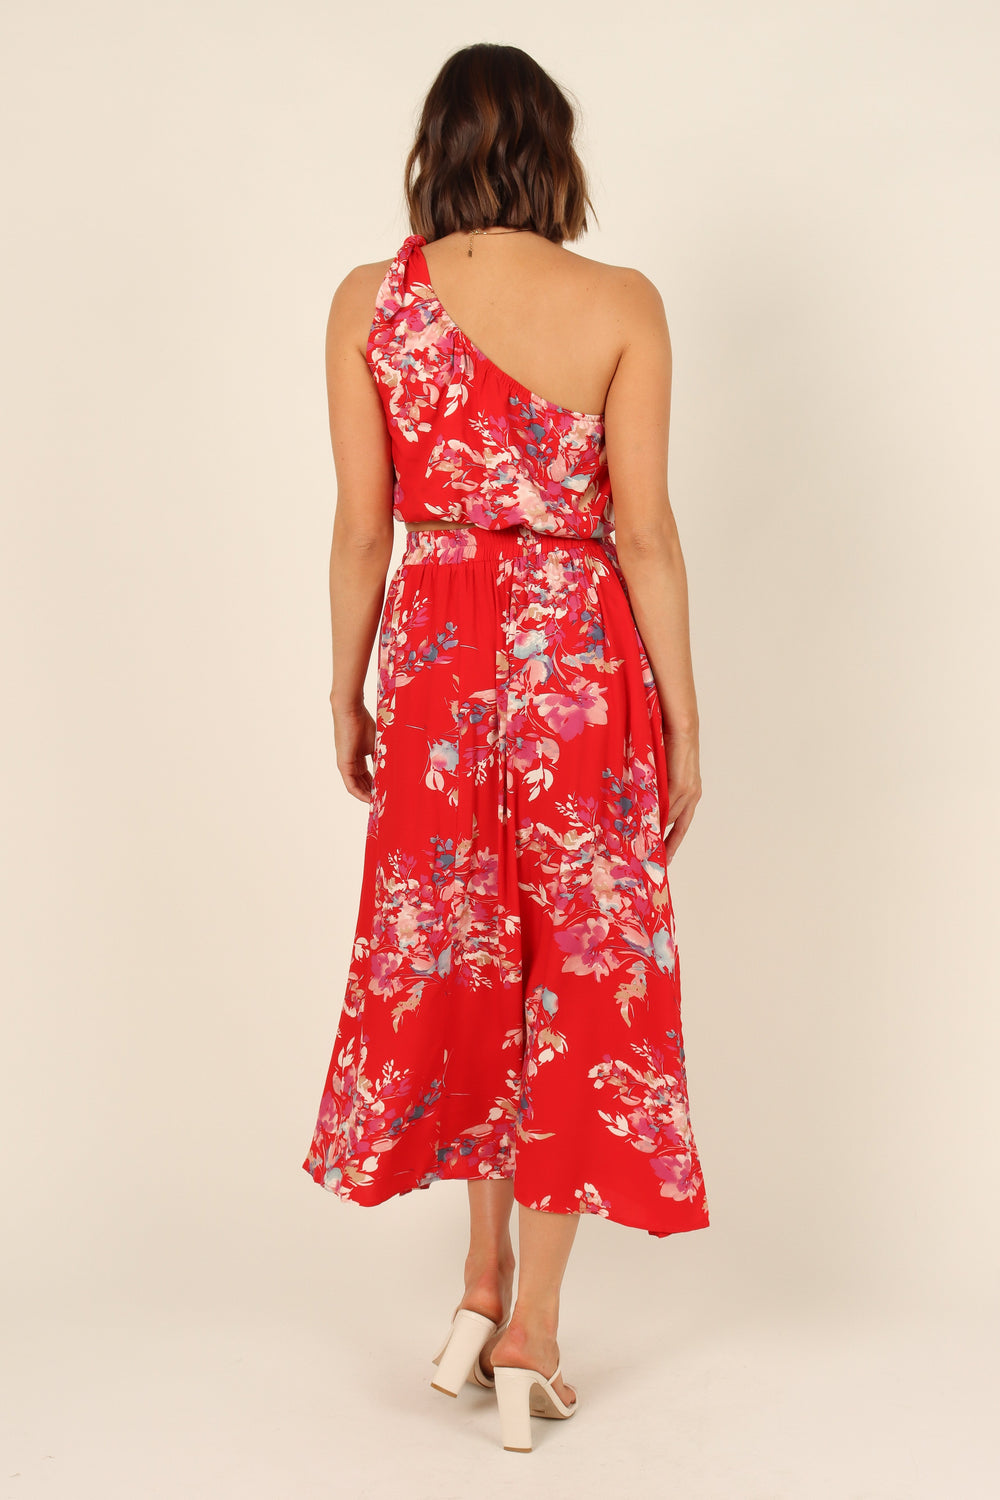 Petal and Pup USA TOPS Laura Top - Red Floral